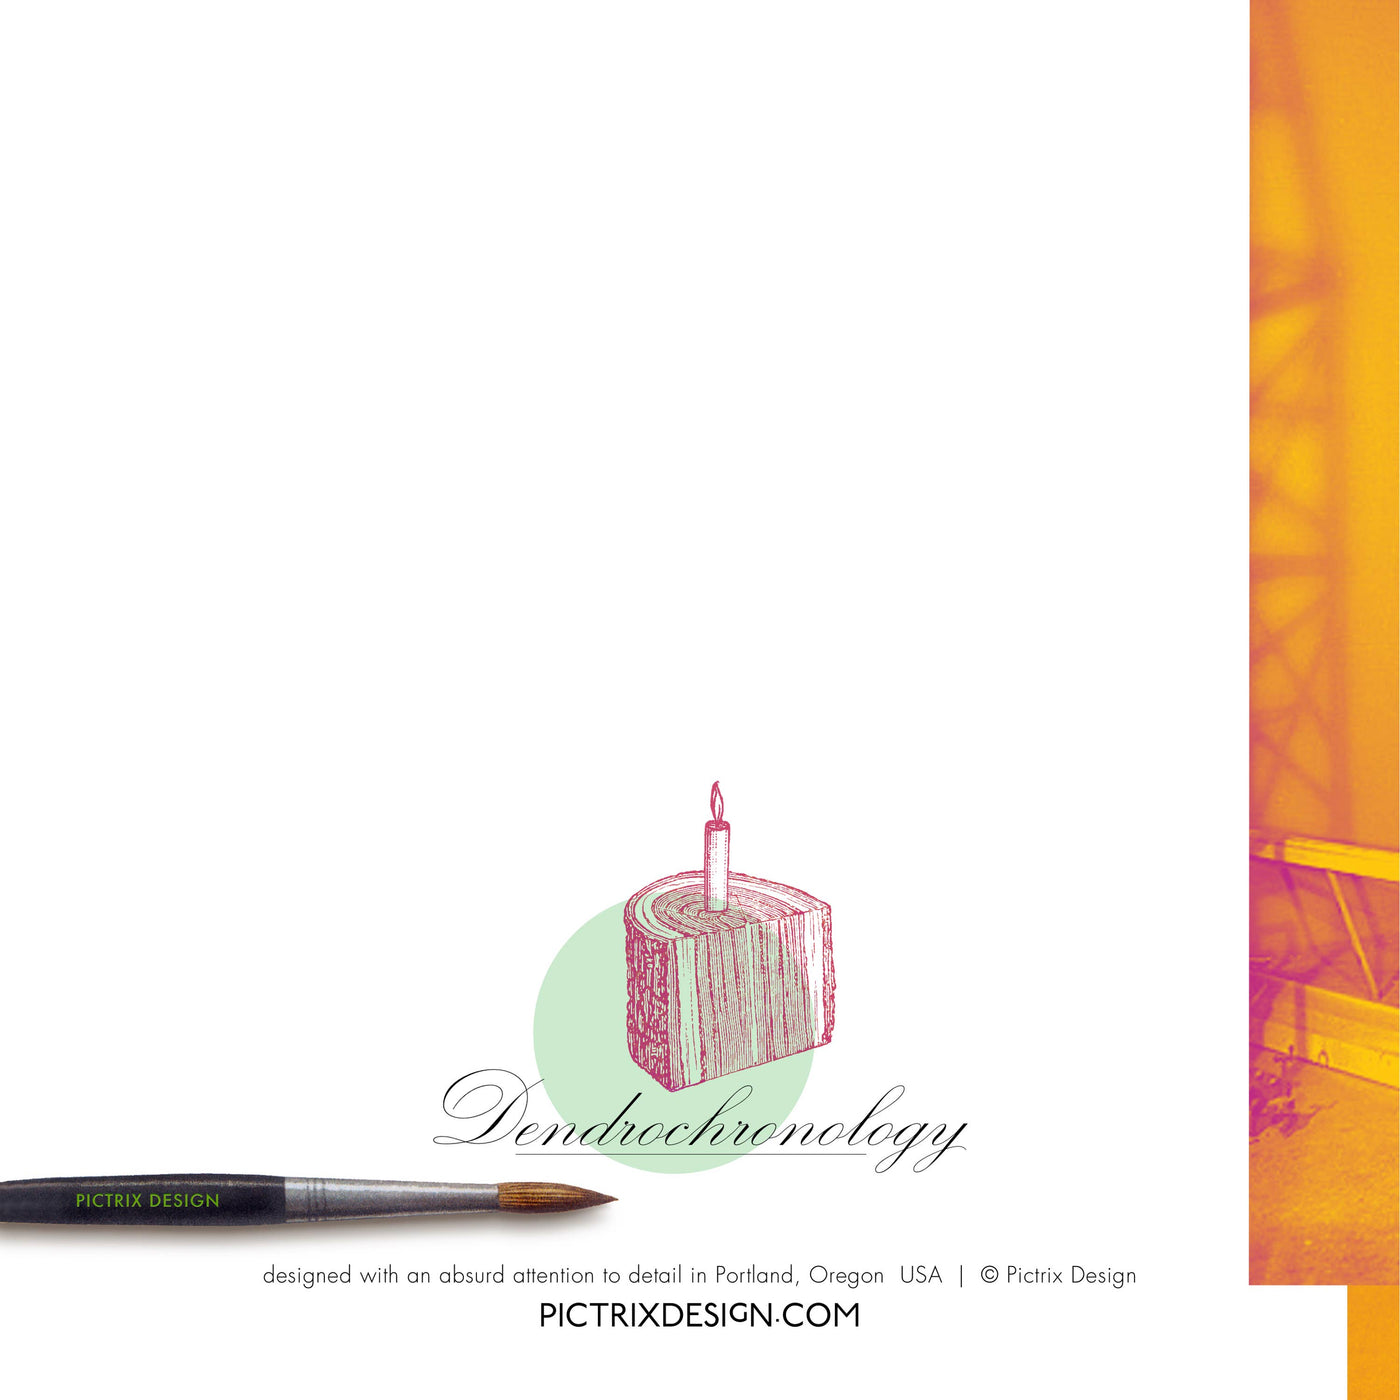 "Dendrochronology" A6 birthday card: Recycled white envelopes